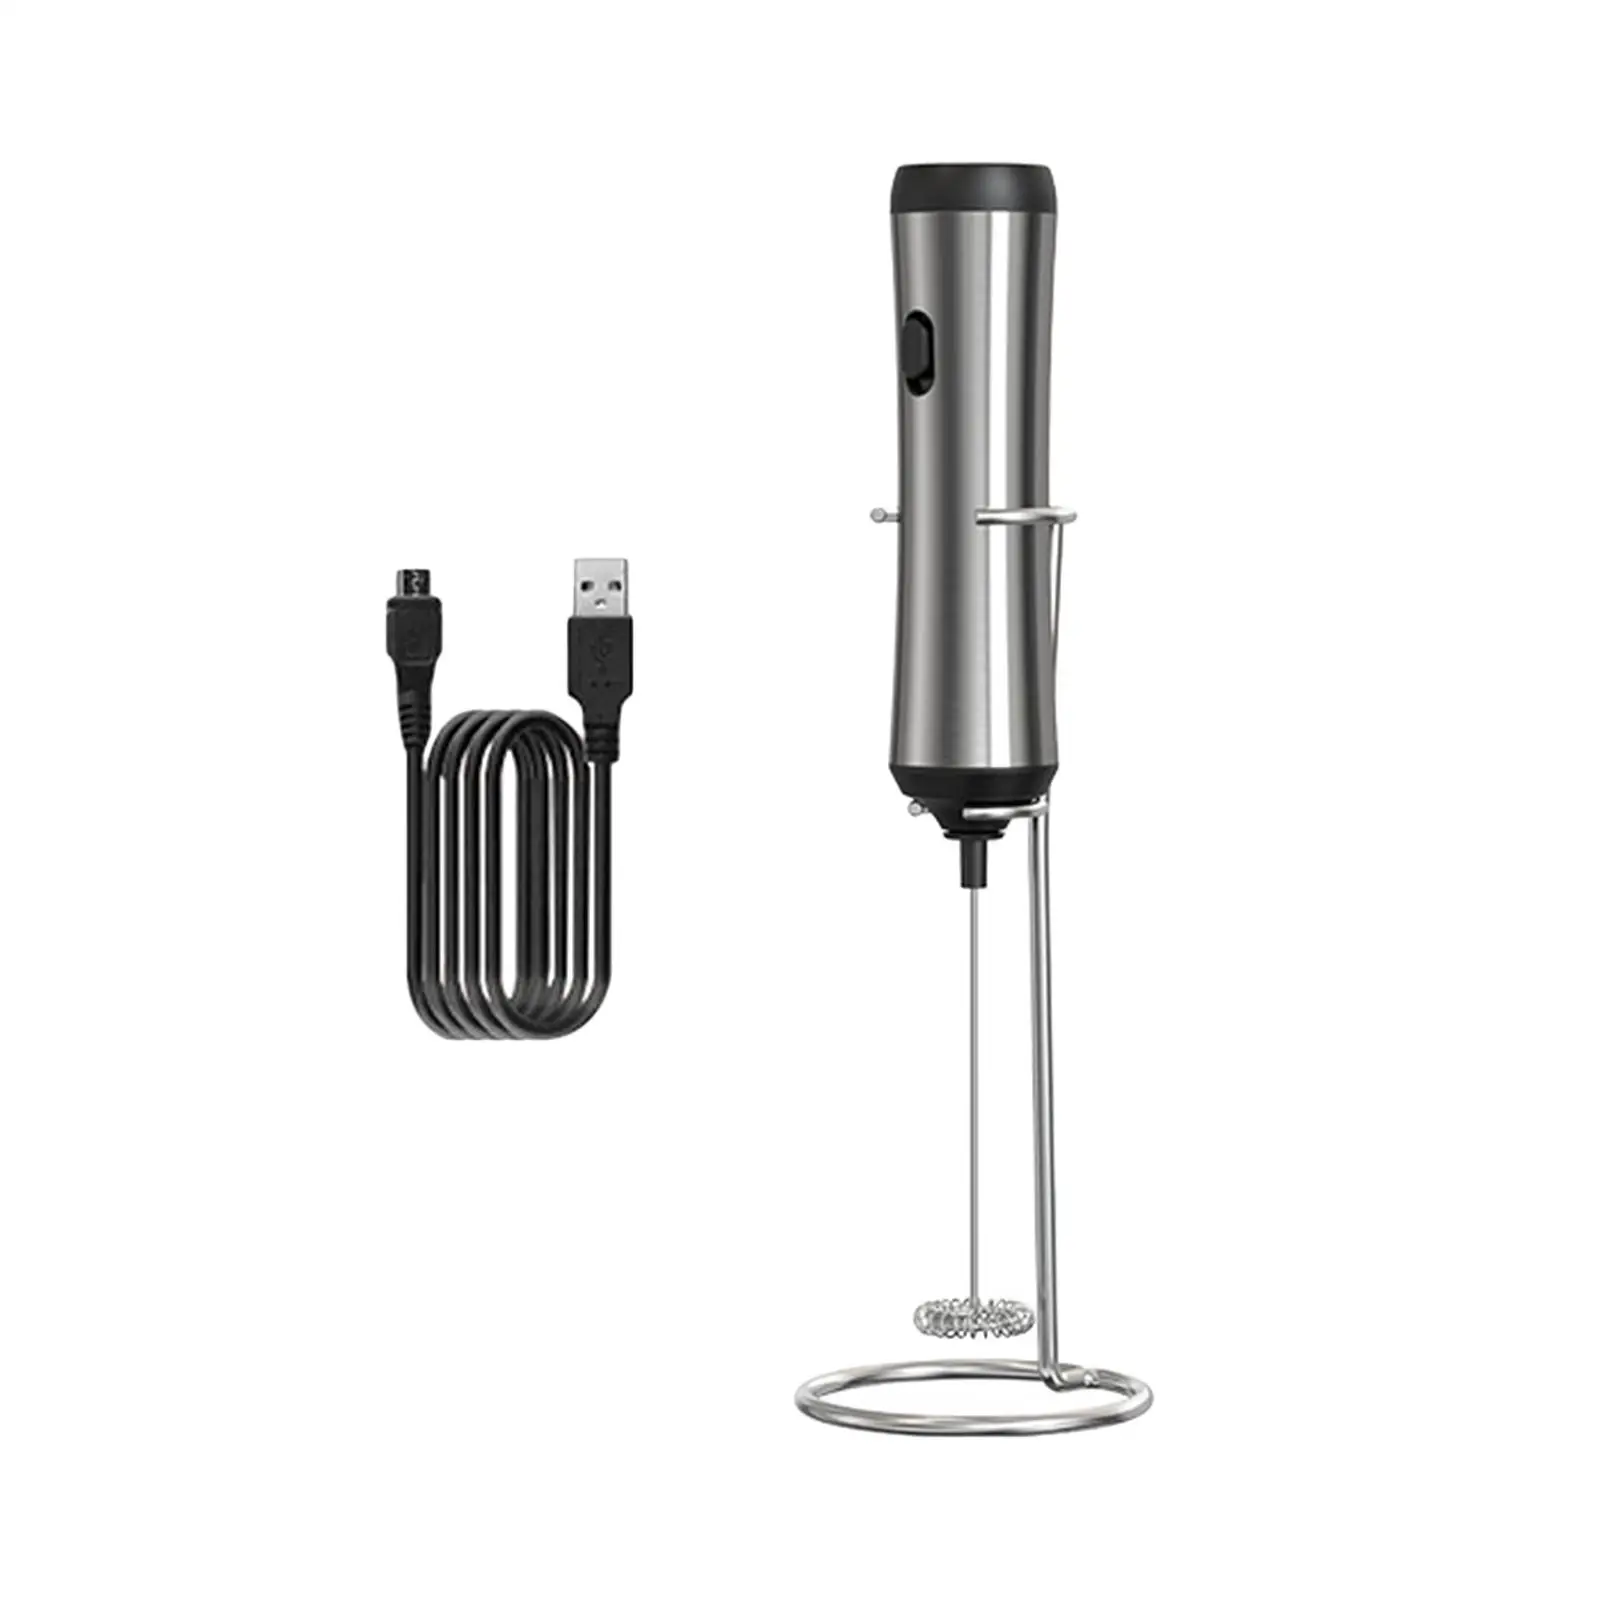 Mini Portable Whisk Drink Stainless Steel Whisk Cream Beater Whisk Drink for Latte Cappuccino coffee Matcha